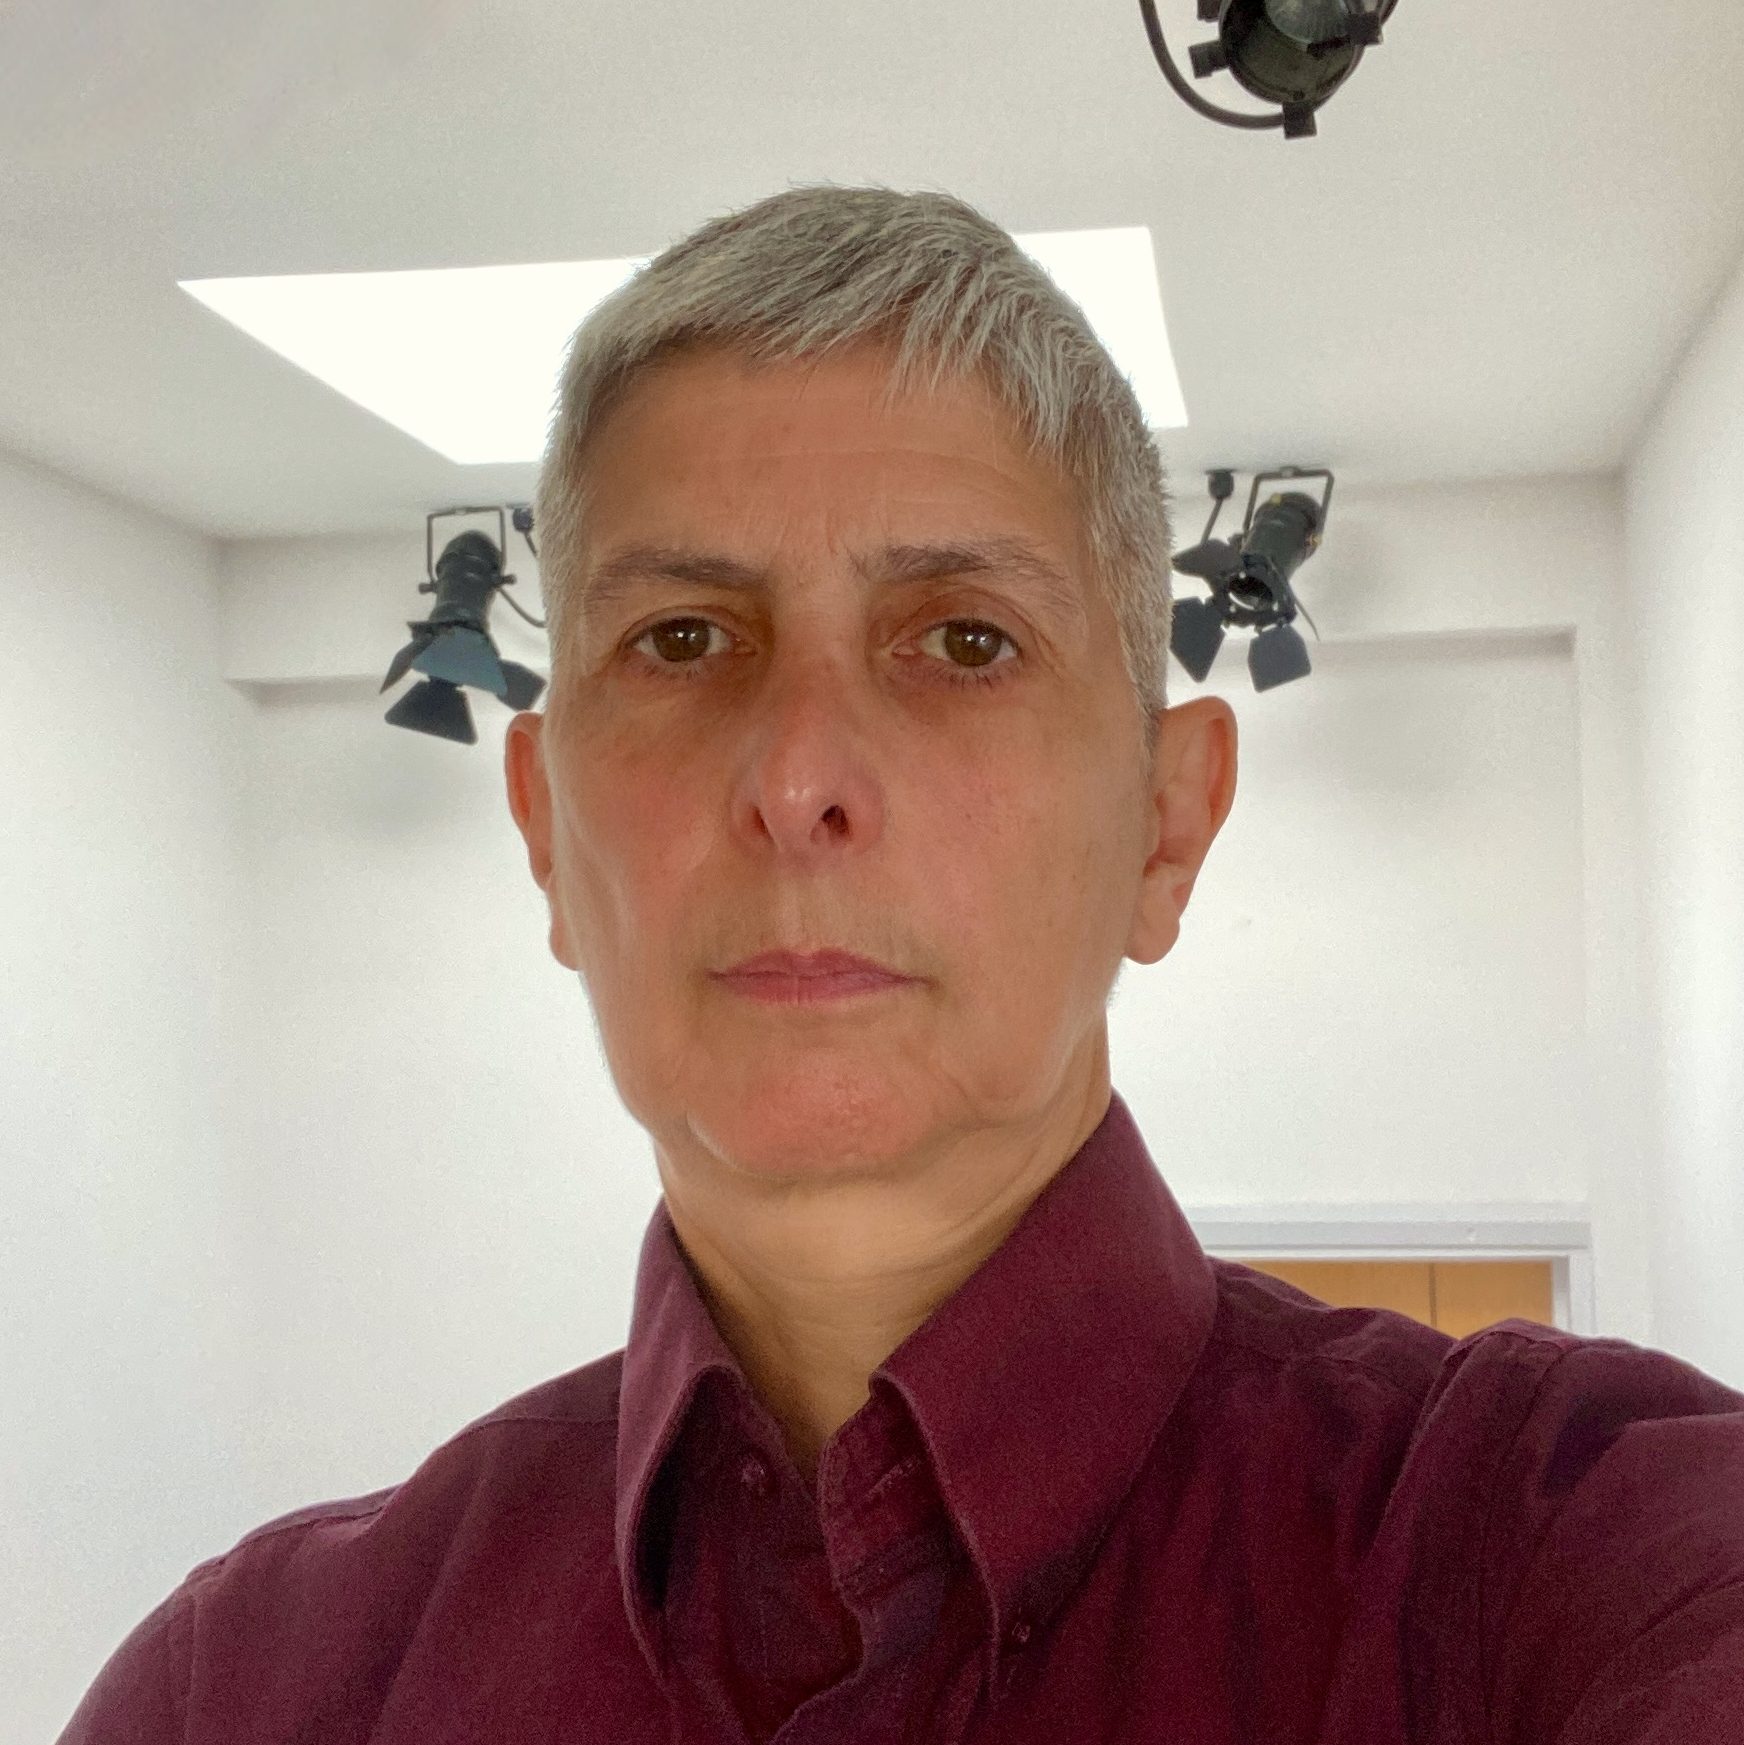 A headshot of Crin Claxton, Crin is a white woman with short grey hair and brown eyes wearing a burgundy shirt and staring stright into the camera.